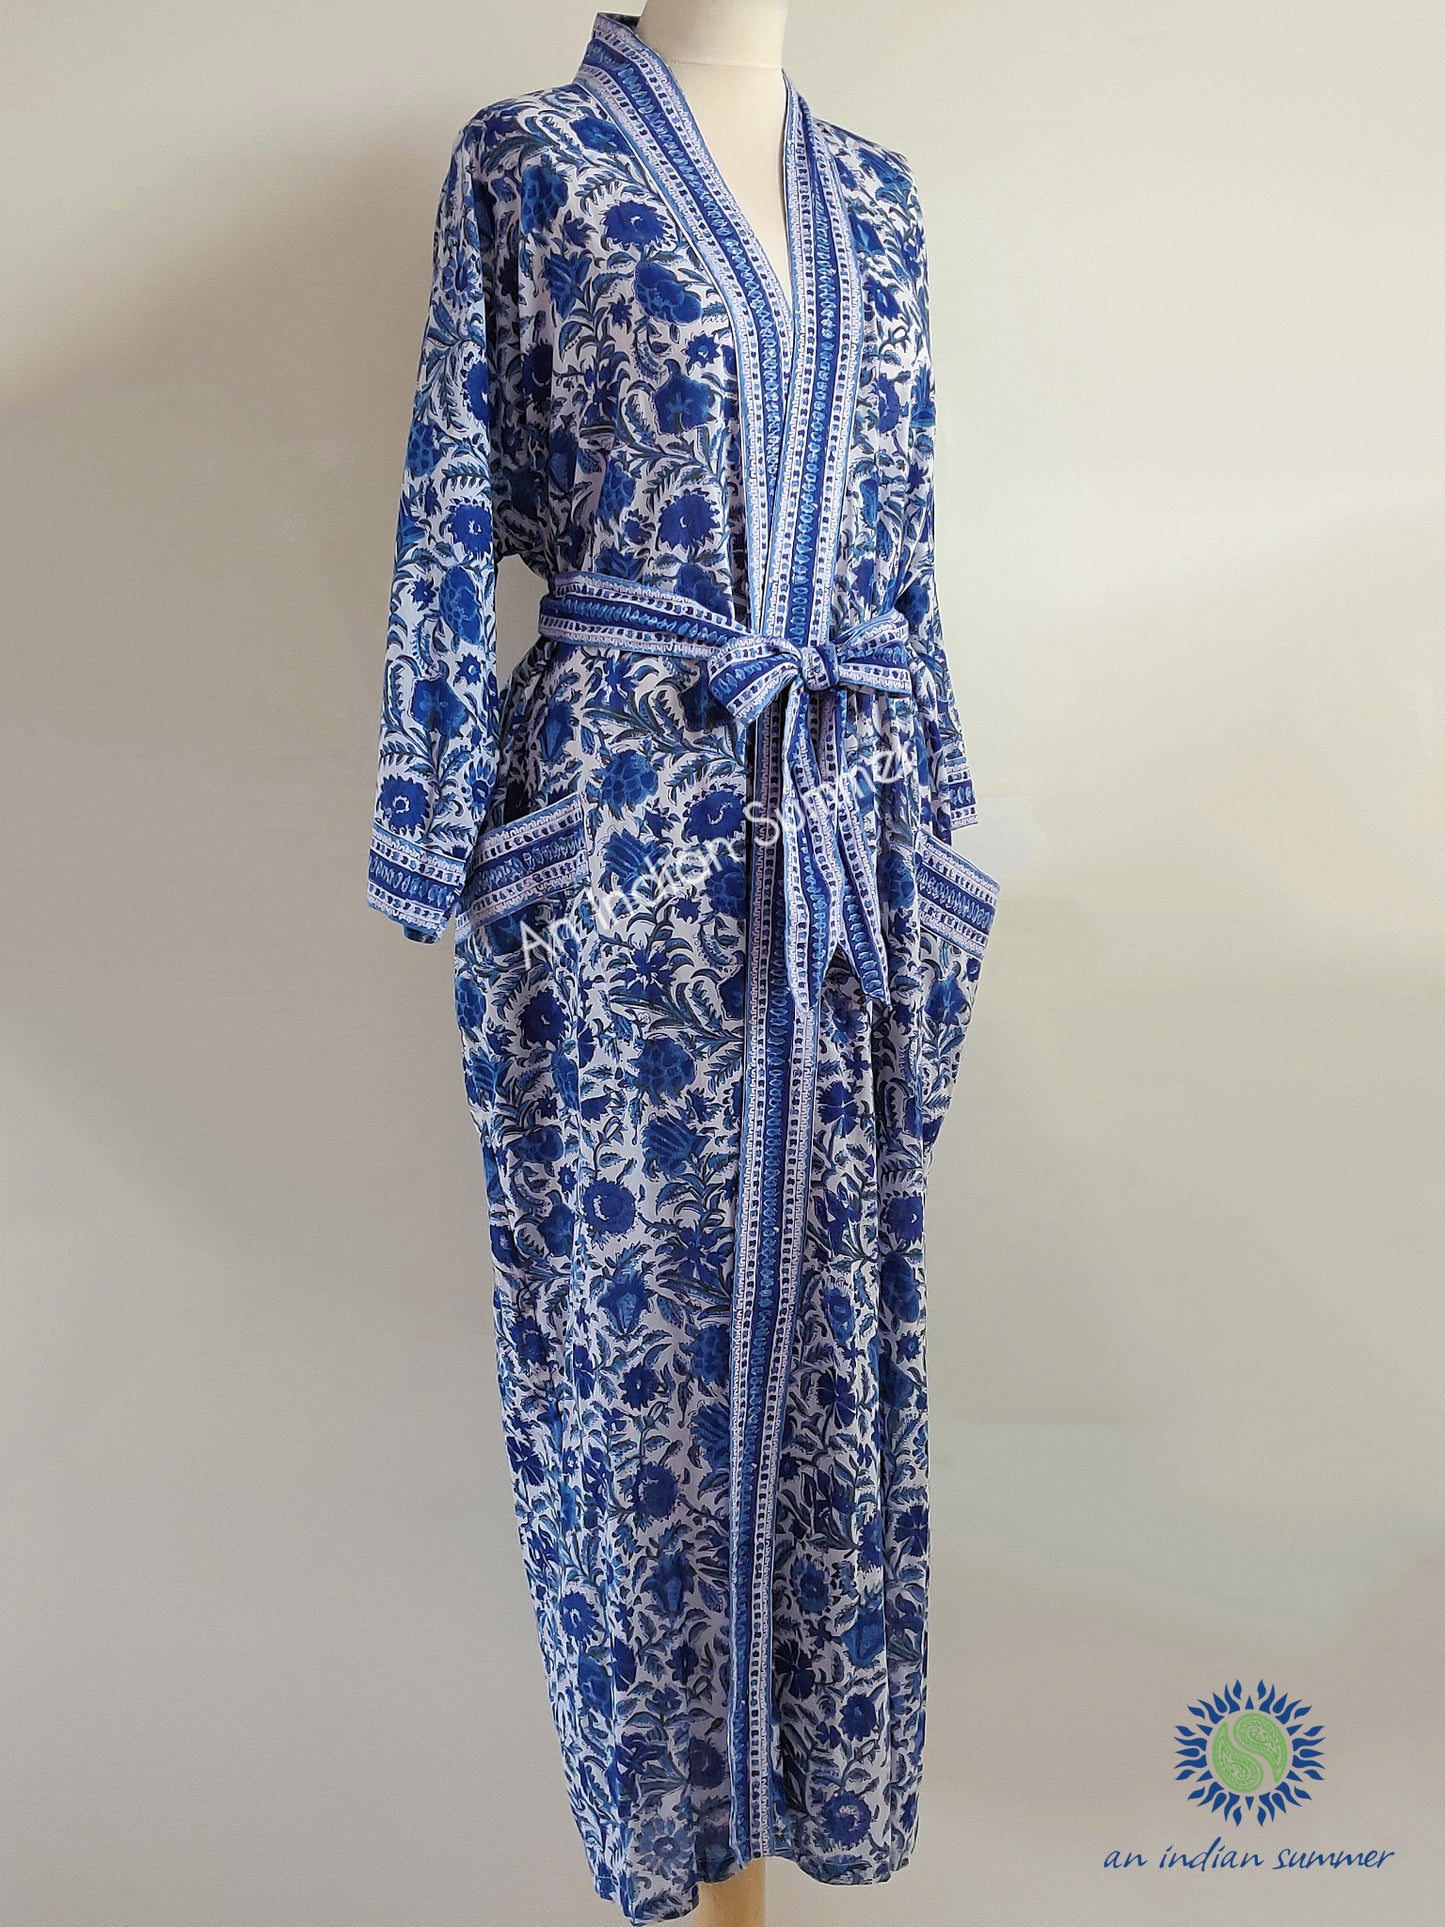 Long Kimono Robe | Chinoiserie | Shades of Blue | Floral Block Print | Hand Block Printed | Cotton Voile | An Indian Summer | Seasonless Timeless Sustainable Ethical Authentic Artisan Conscious Clothing Lifestyle Brand